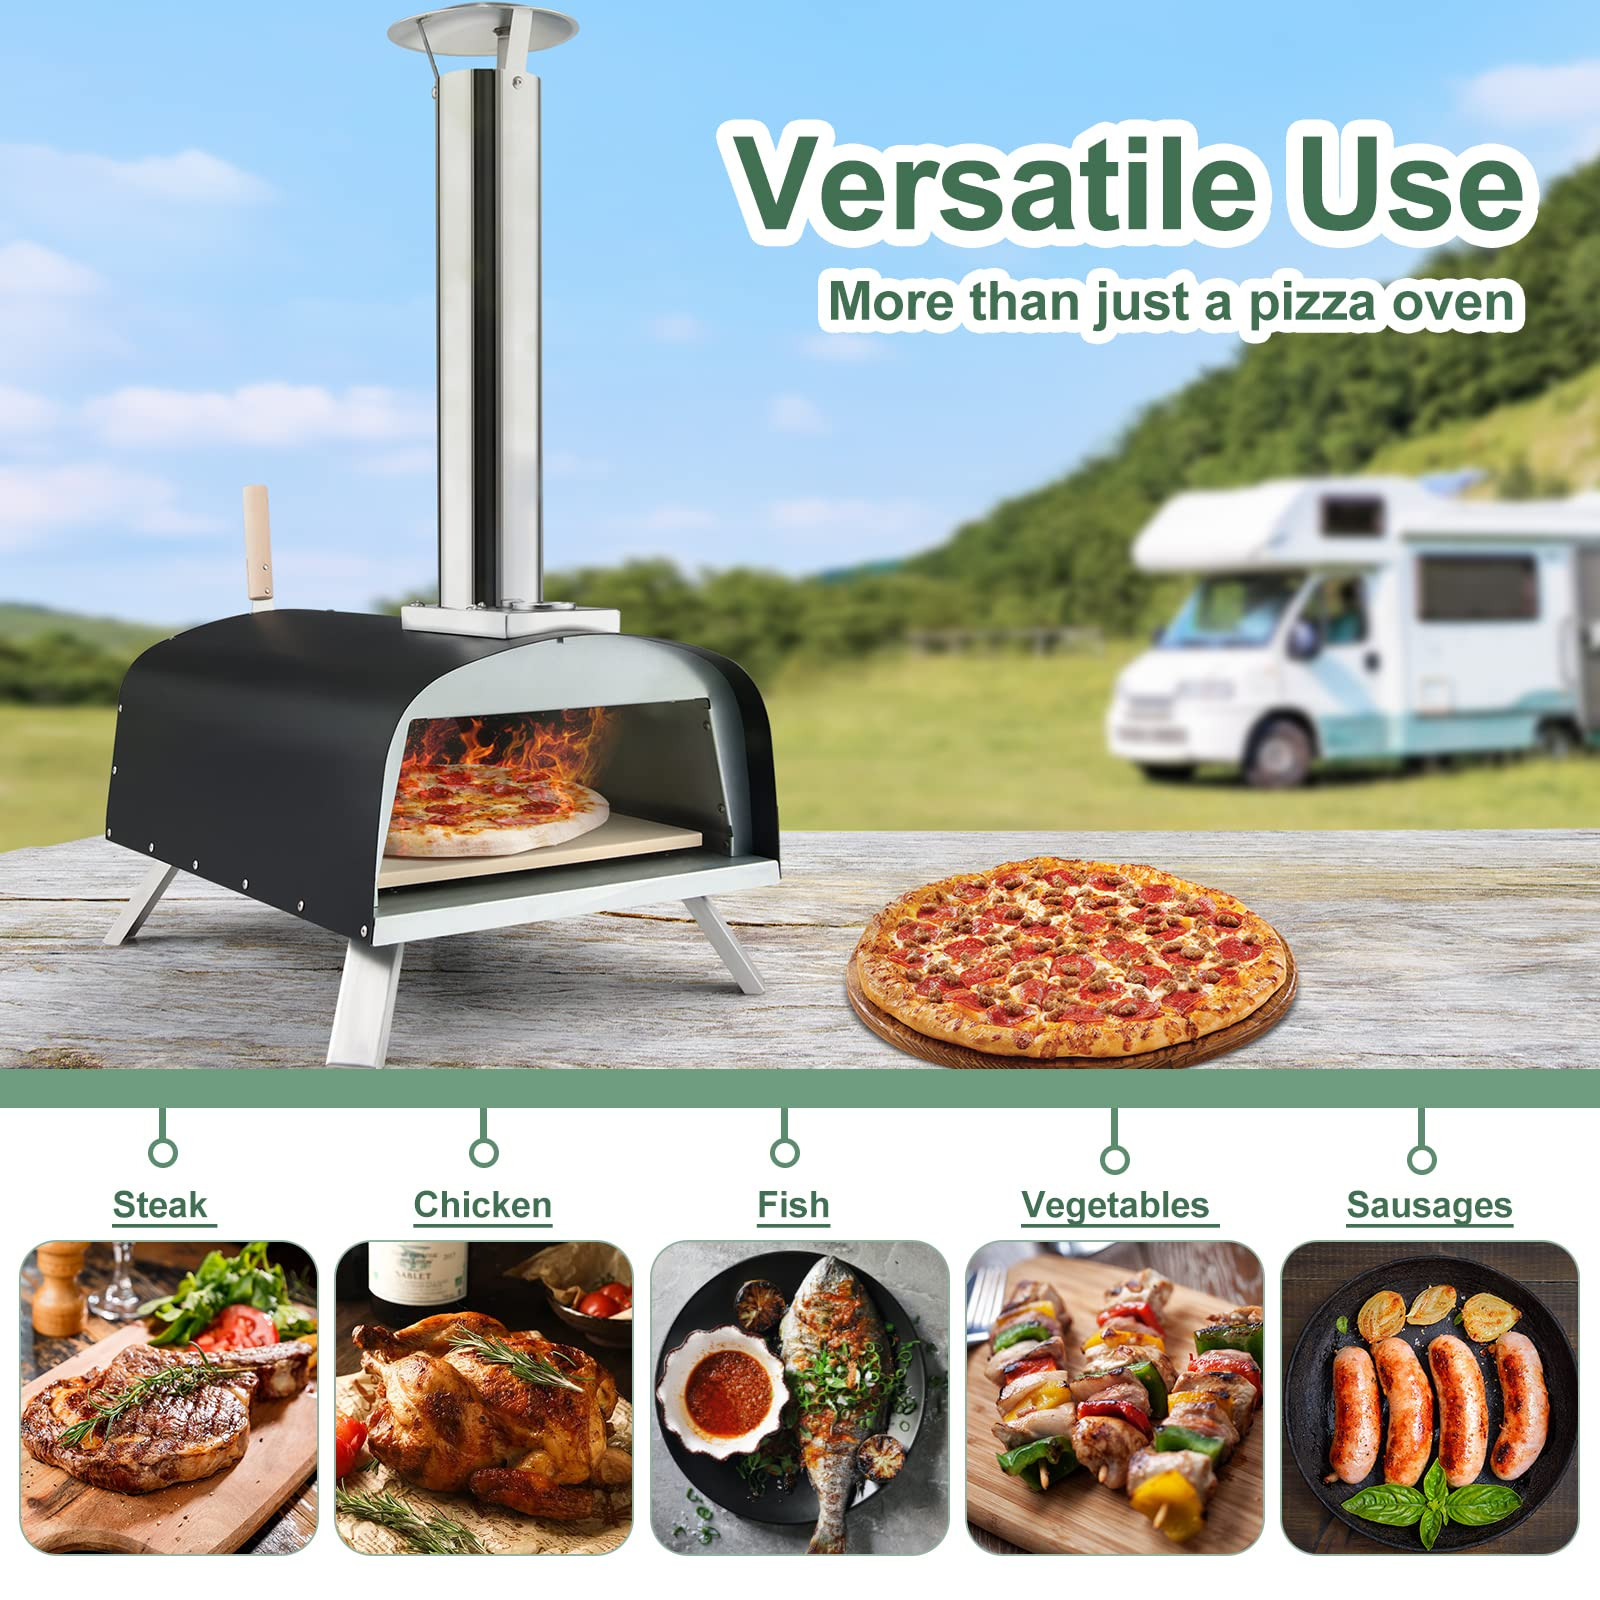 Giantex Pizza Oven, Outdoor Wood Fired Pizza Oven